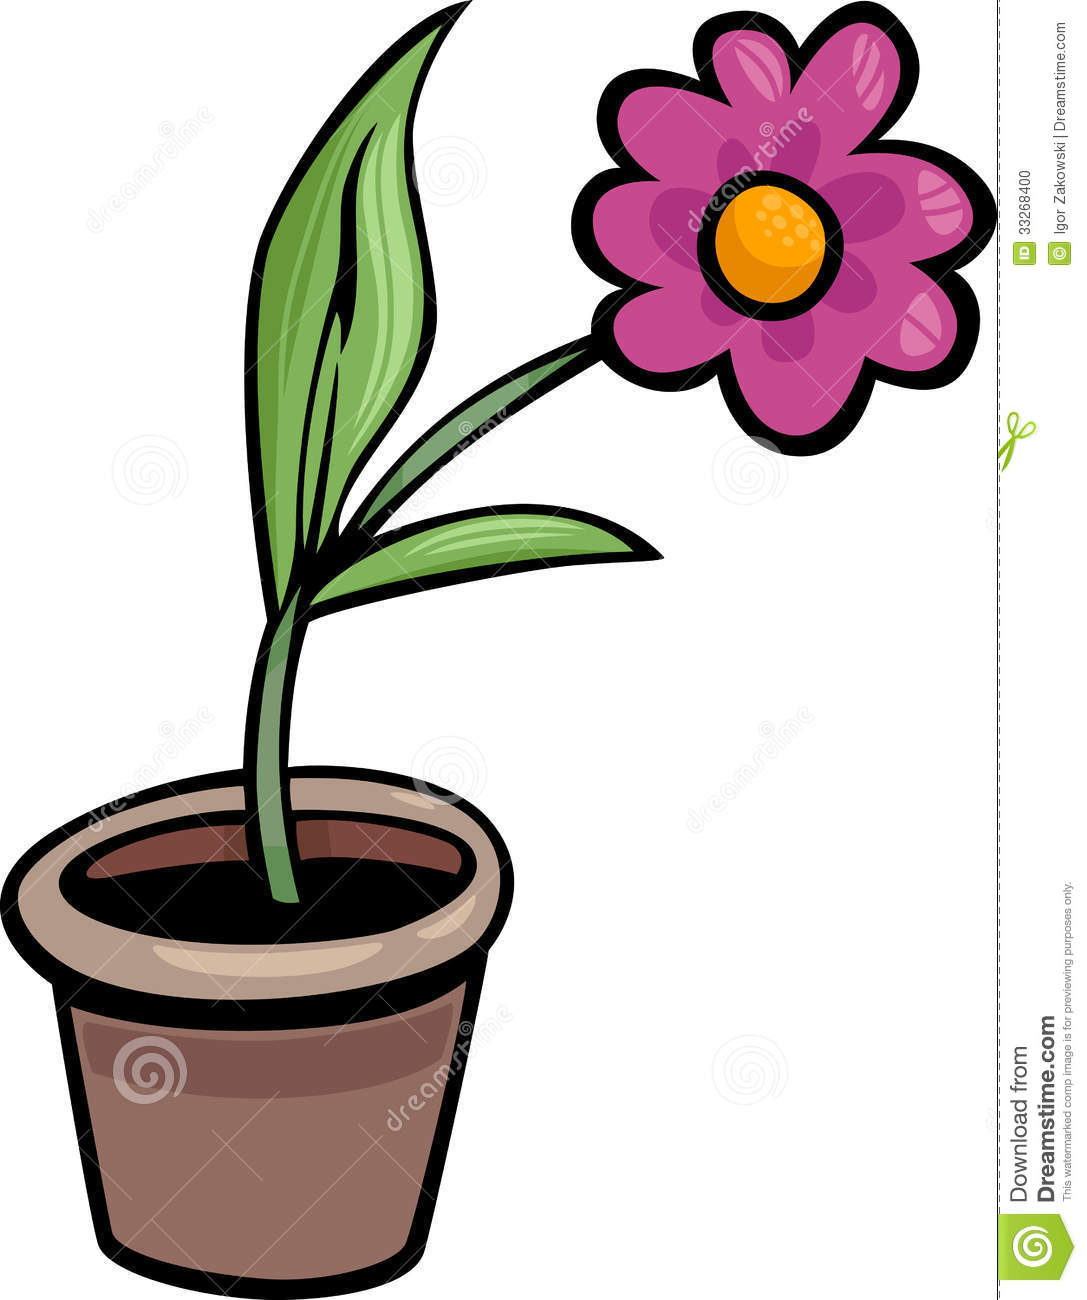 Potted Plant Clipart Black And White   Clipart Panda   Free Clipart